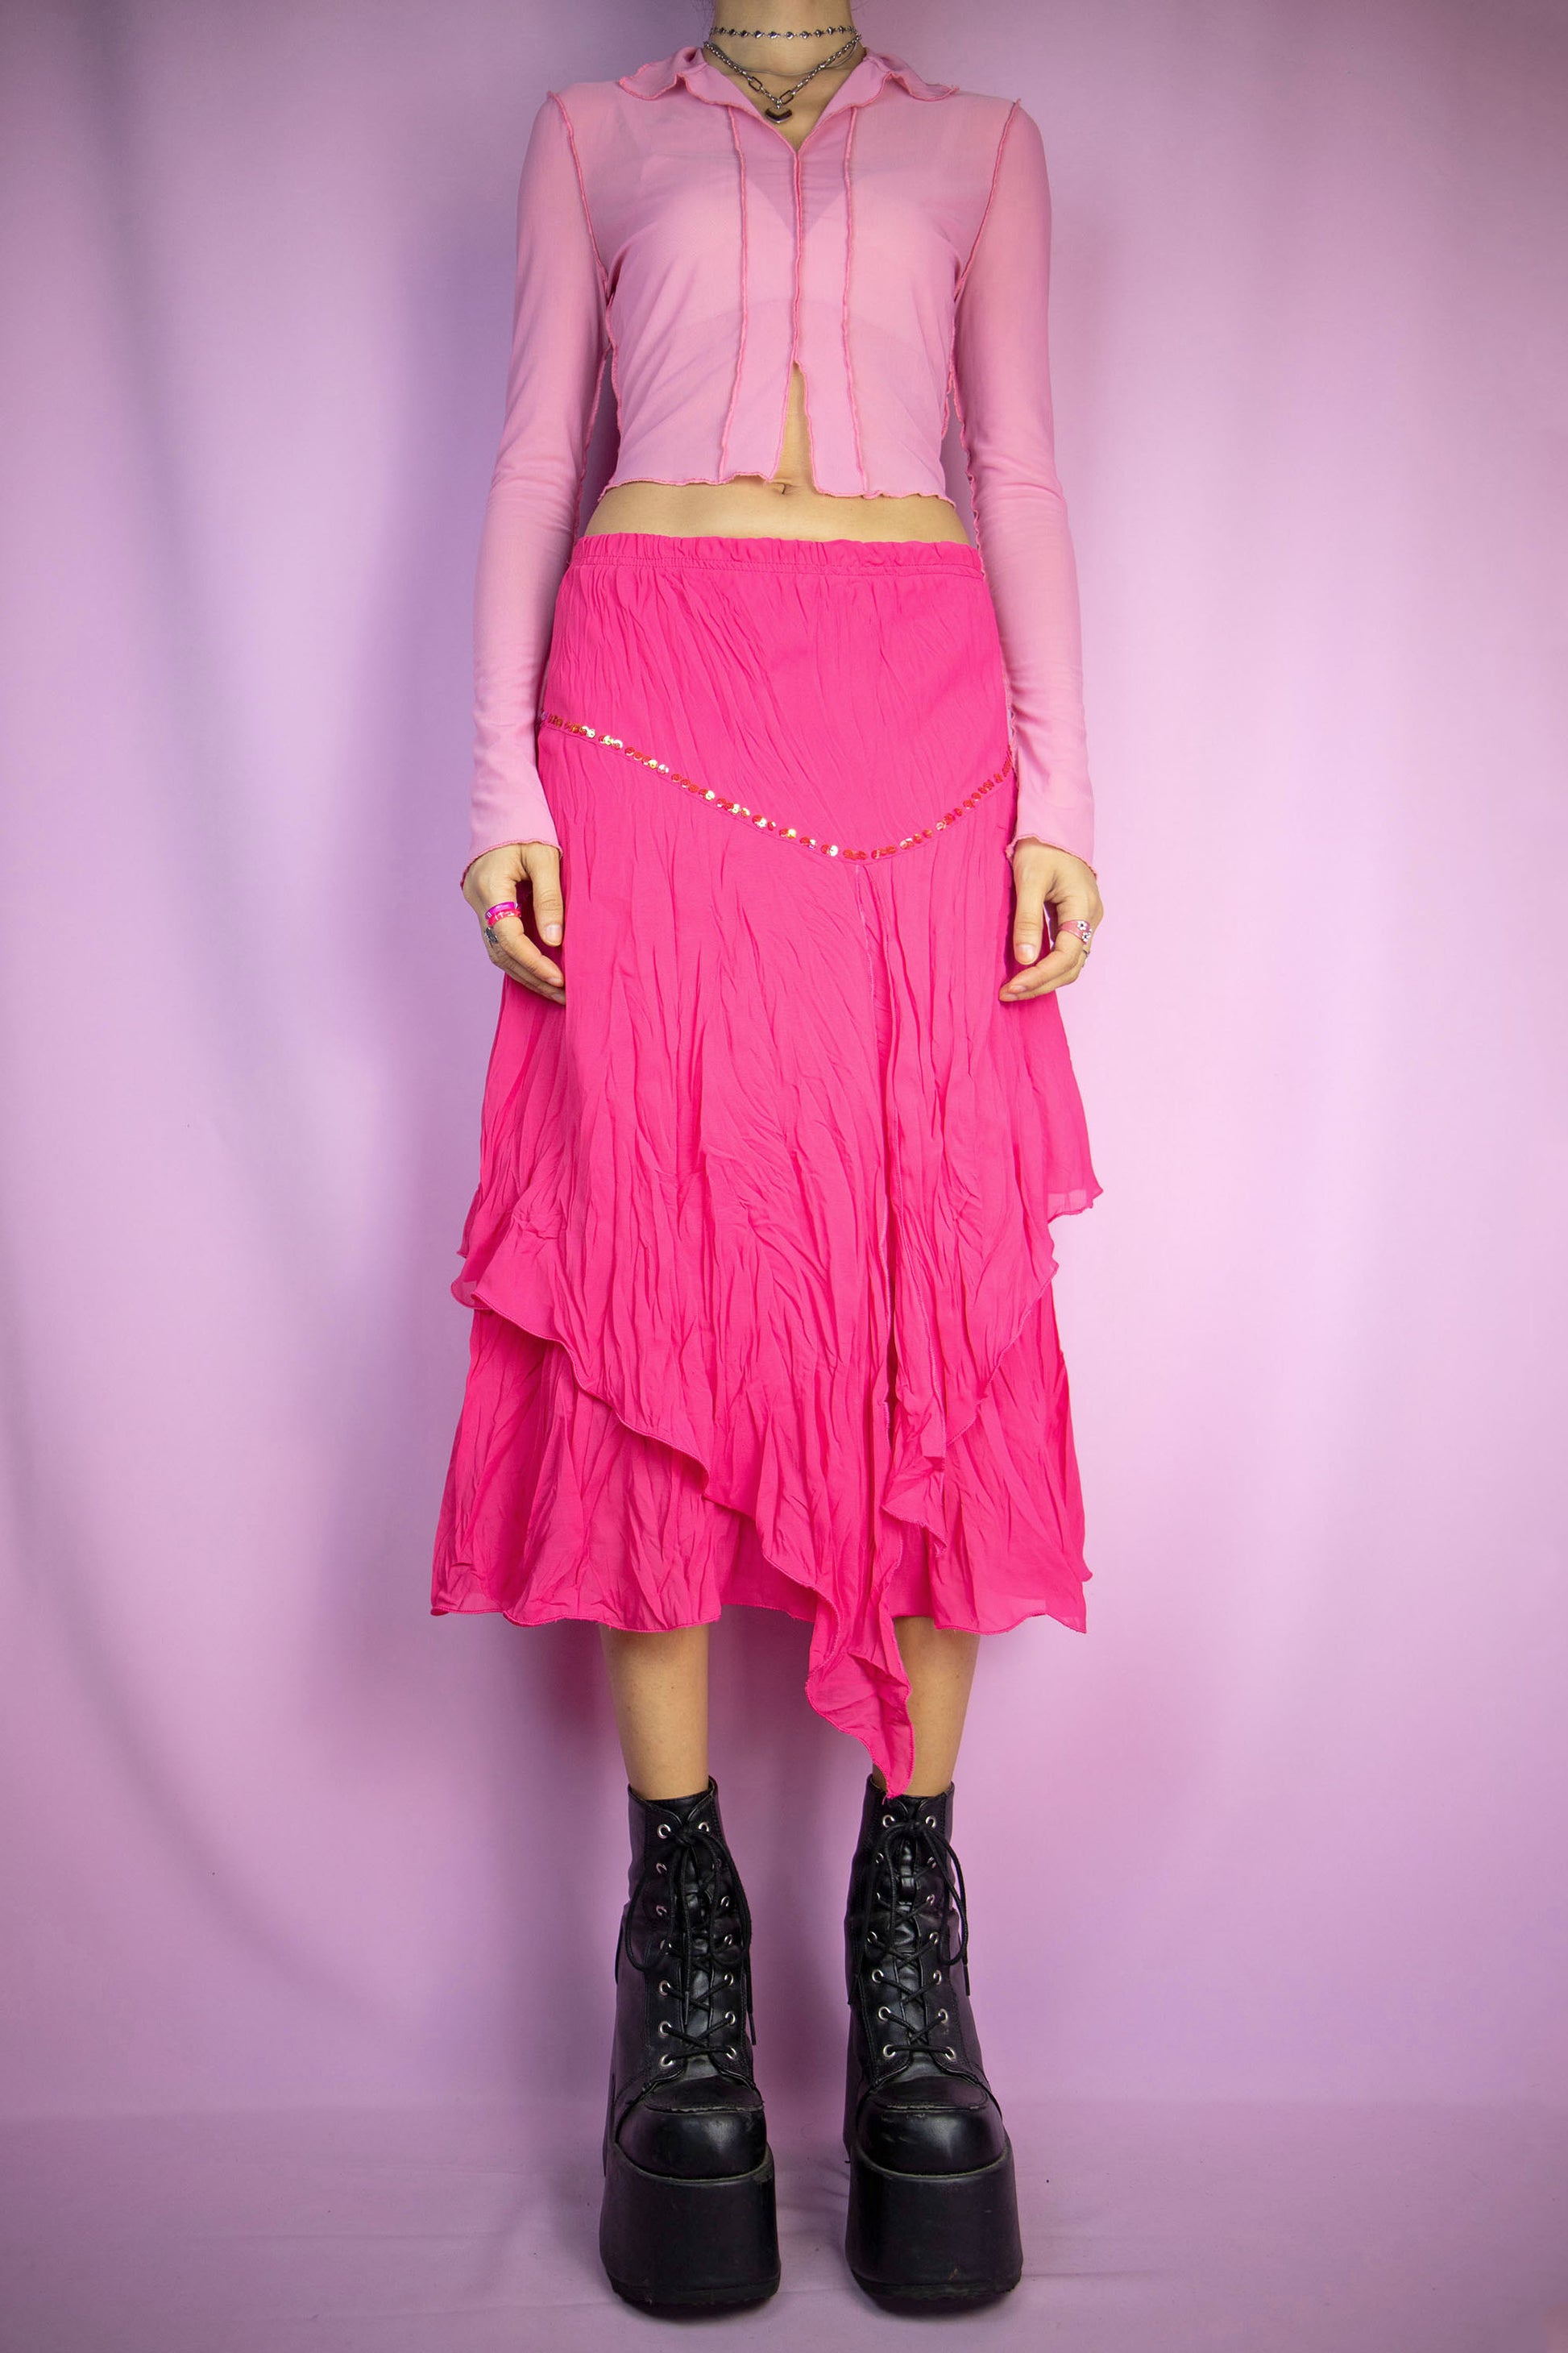 The Pink Asymmetric Midi Skirt is a vintage hot pink fuchsia layered skirt with an asymmetric pointed hem, adorned with sequin details and featuring an elasticated waist. Romantic boho fairy grunge 2000s evening party maxi skirt. Excellent vintage condition.